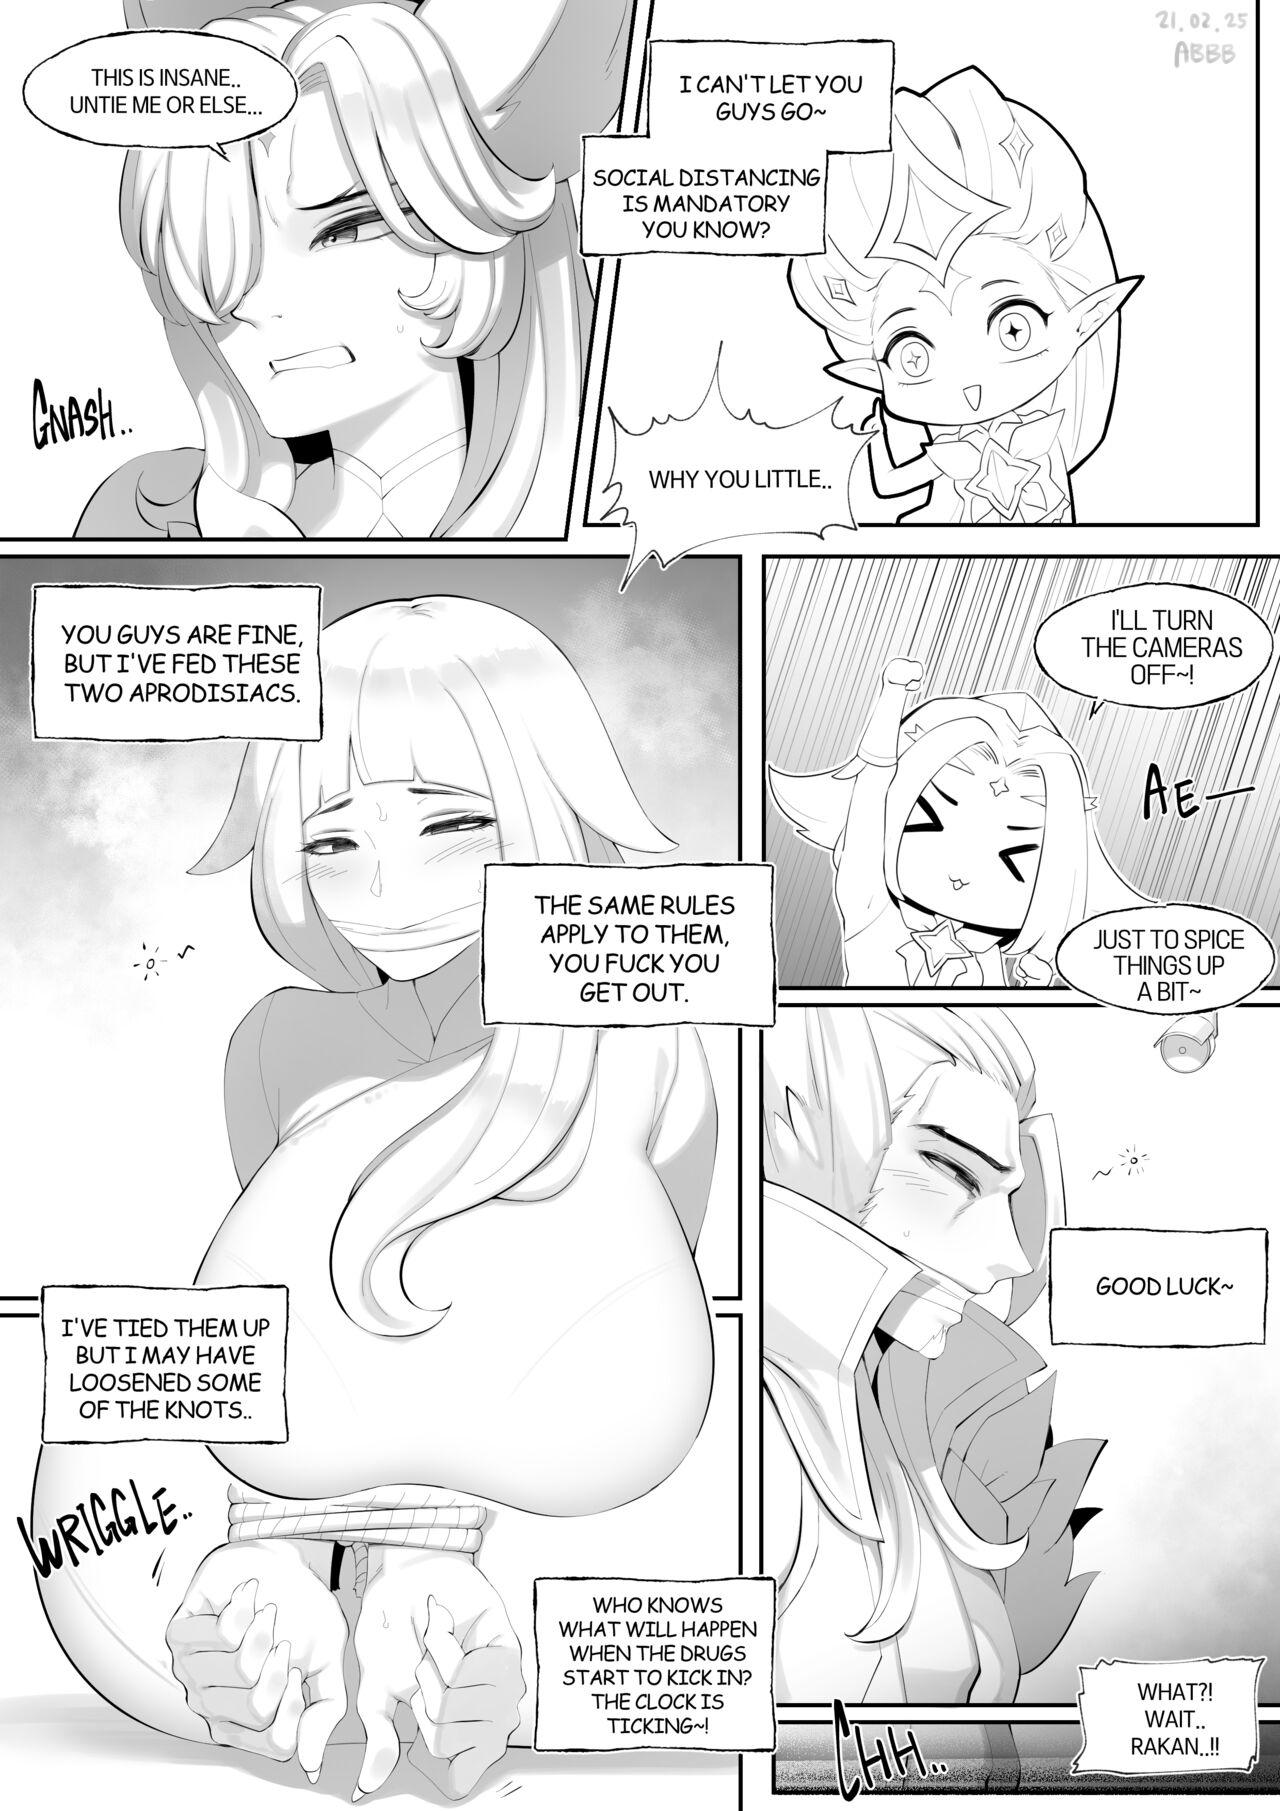 Old And Young Xayah Star Guardian - League of legends Softcore - Page 2